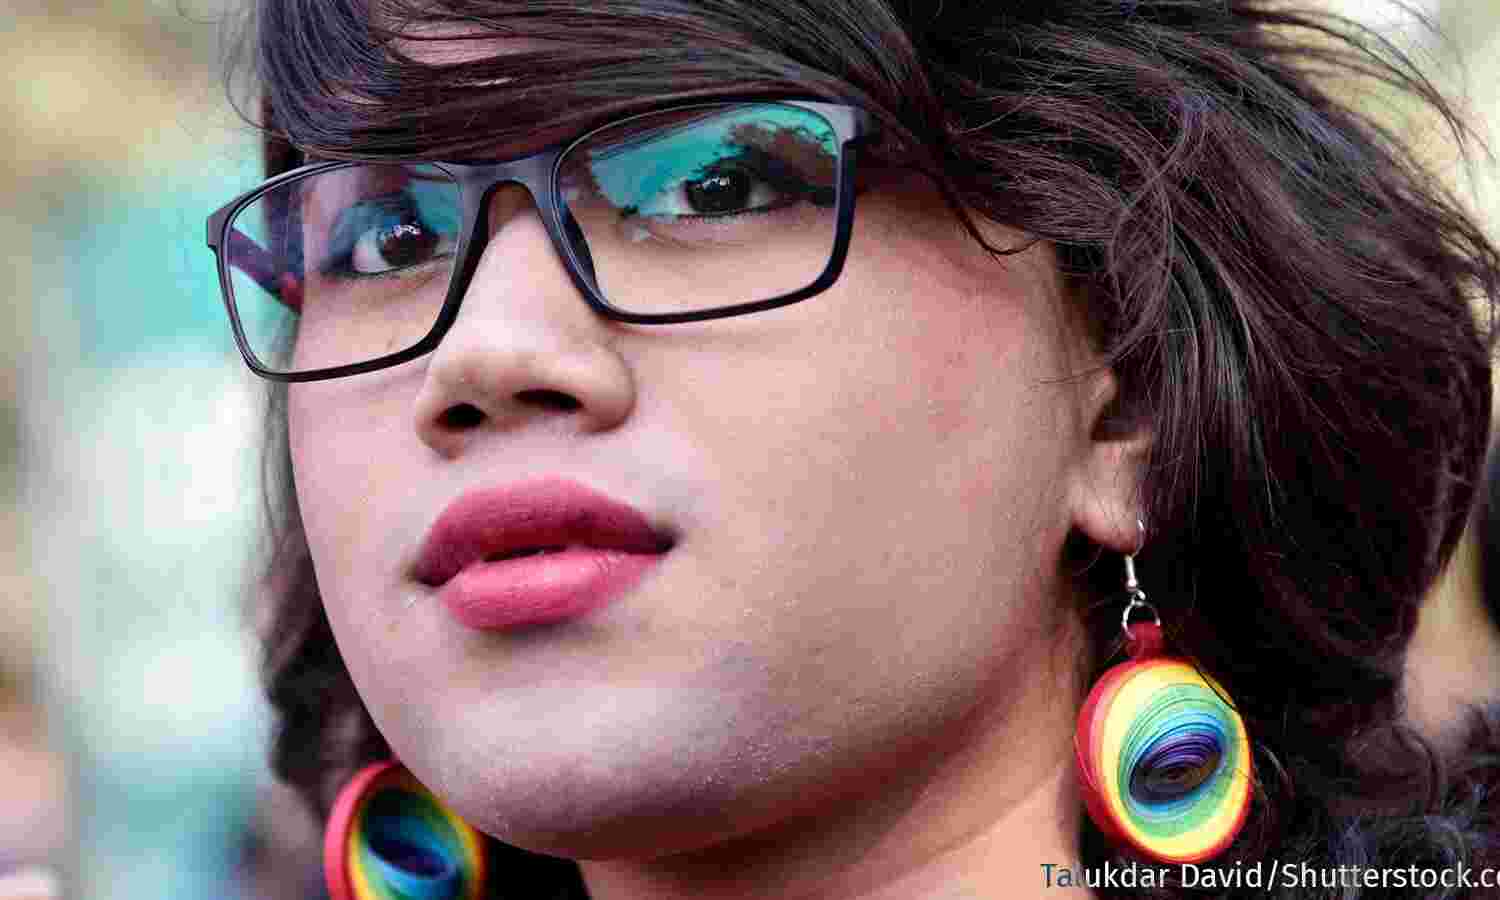 Denied Visibility In Official Data, Transgender Indians Can't Access Benefits, Services